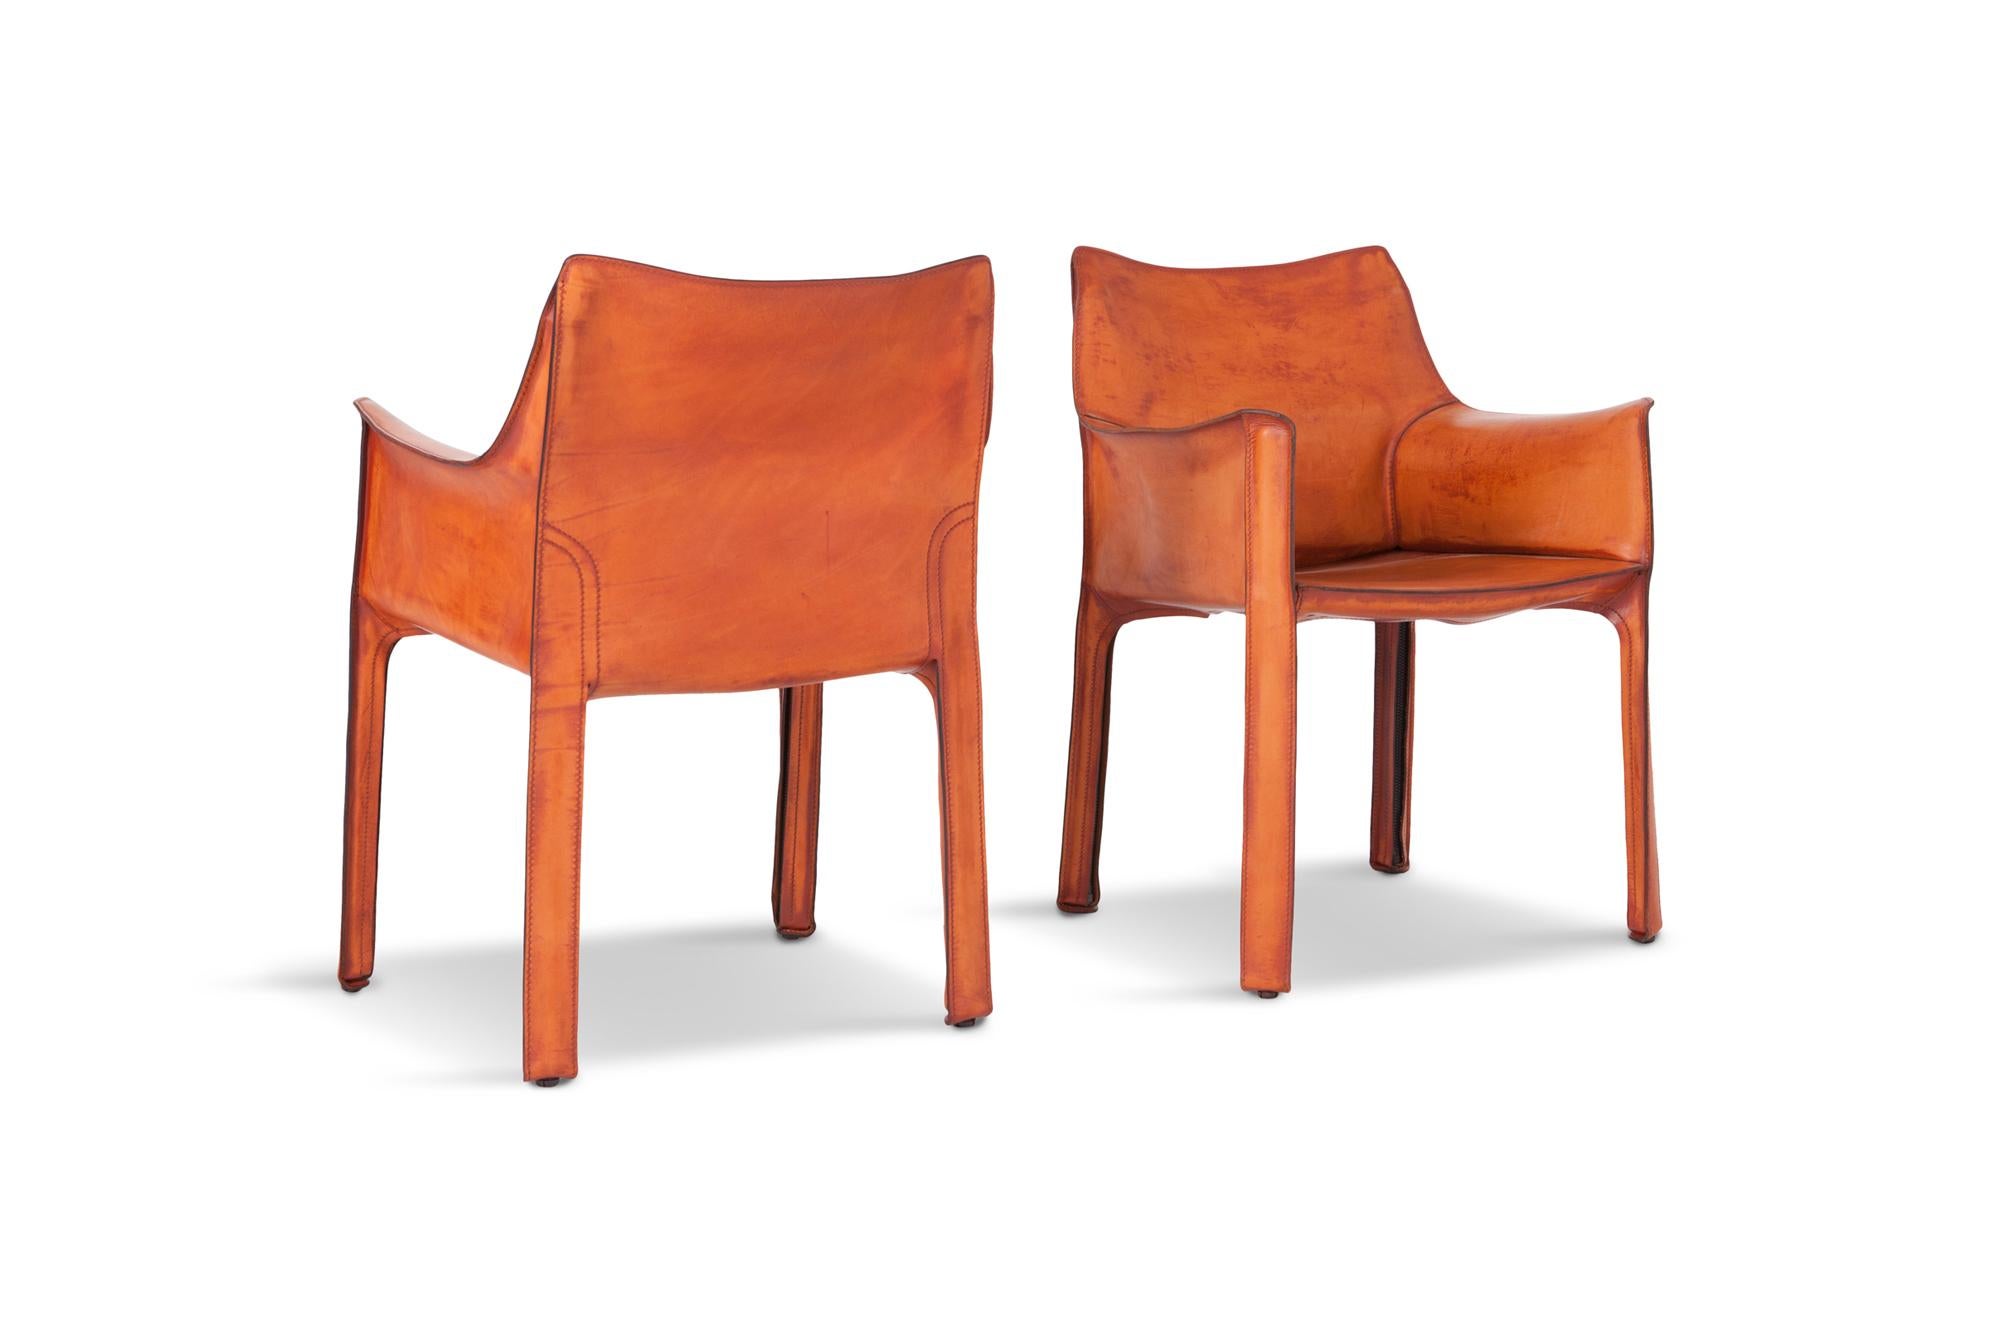 CAB 413 armchairs in cognac leather by Mario Bellini.

Gorgeously patinated natural Cognac leather, wonderful wear and tear giving these chairs a ton of character. ??

Sold as a pair.

Italy, 1970’s

W 58 D 52 H 81 SH 44 cm